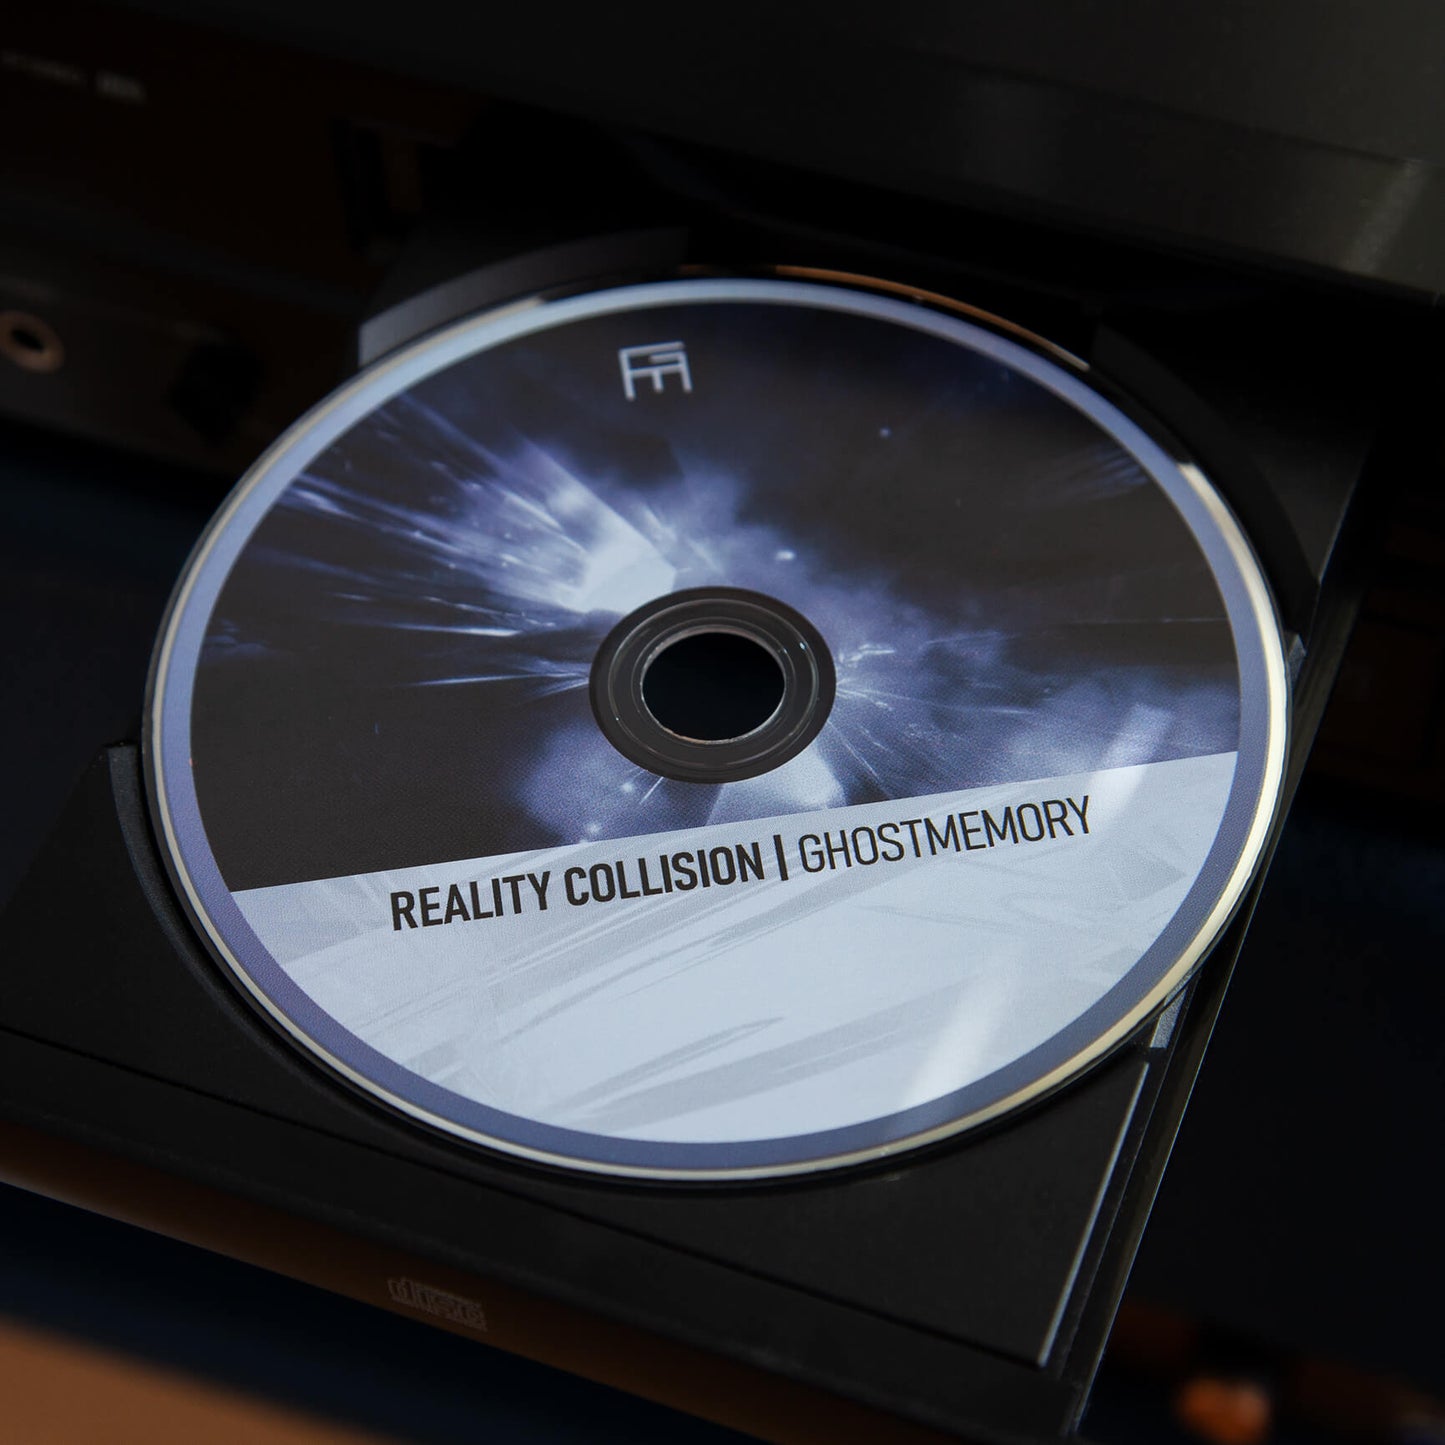 Ghostmemory - Reality Collision CD